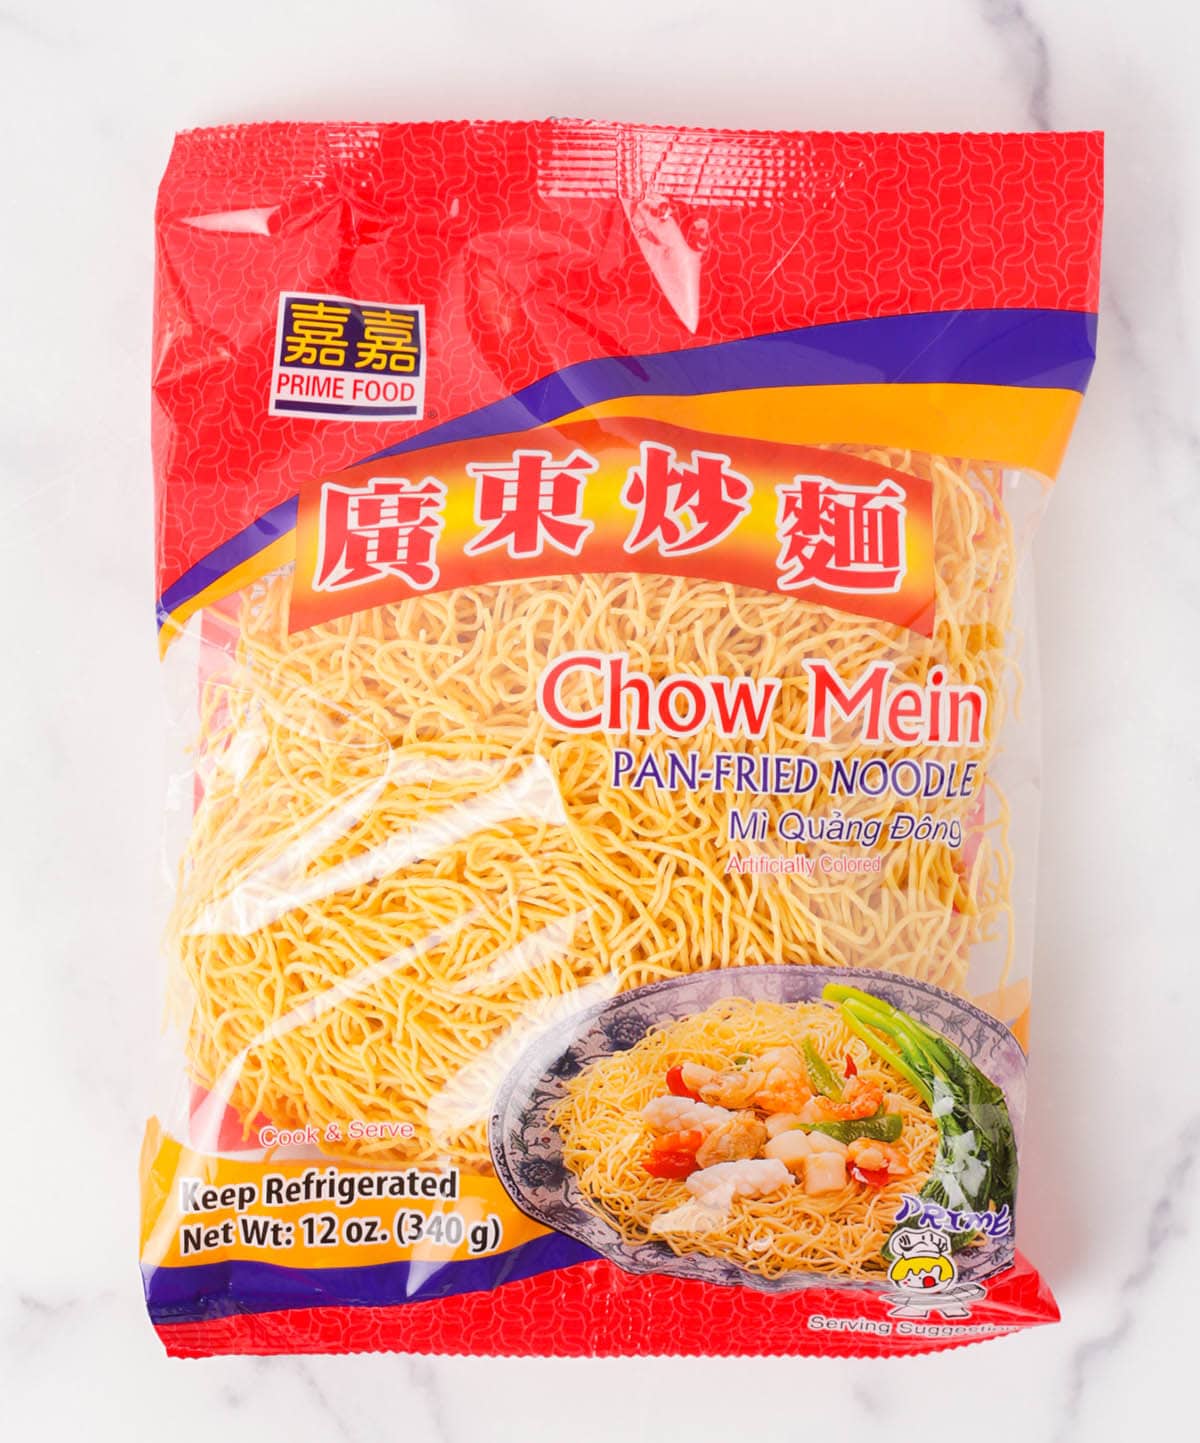 Chow mein noodle package.